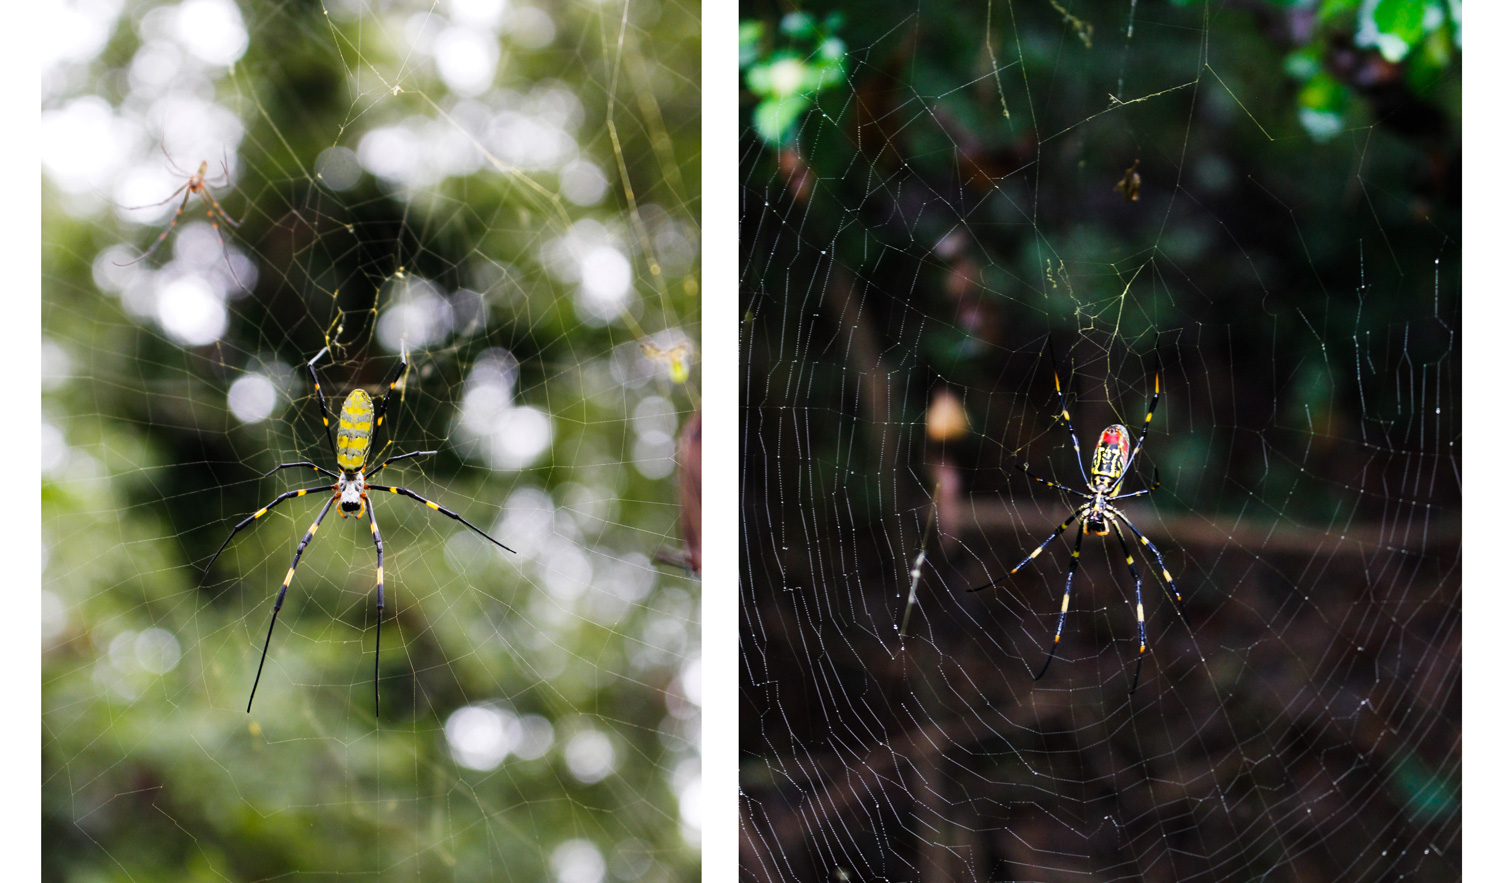 The left image shows the back/top side of an adult female Joro spider with a striped yellow body. The right image shows the underside of the spider, showing a yellow and black pattern with a prominent red area.